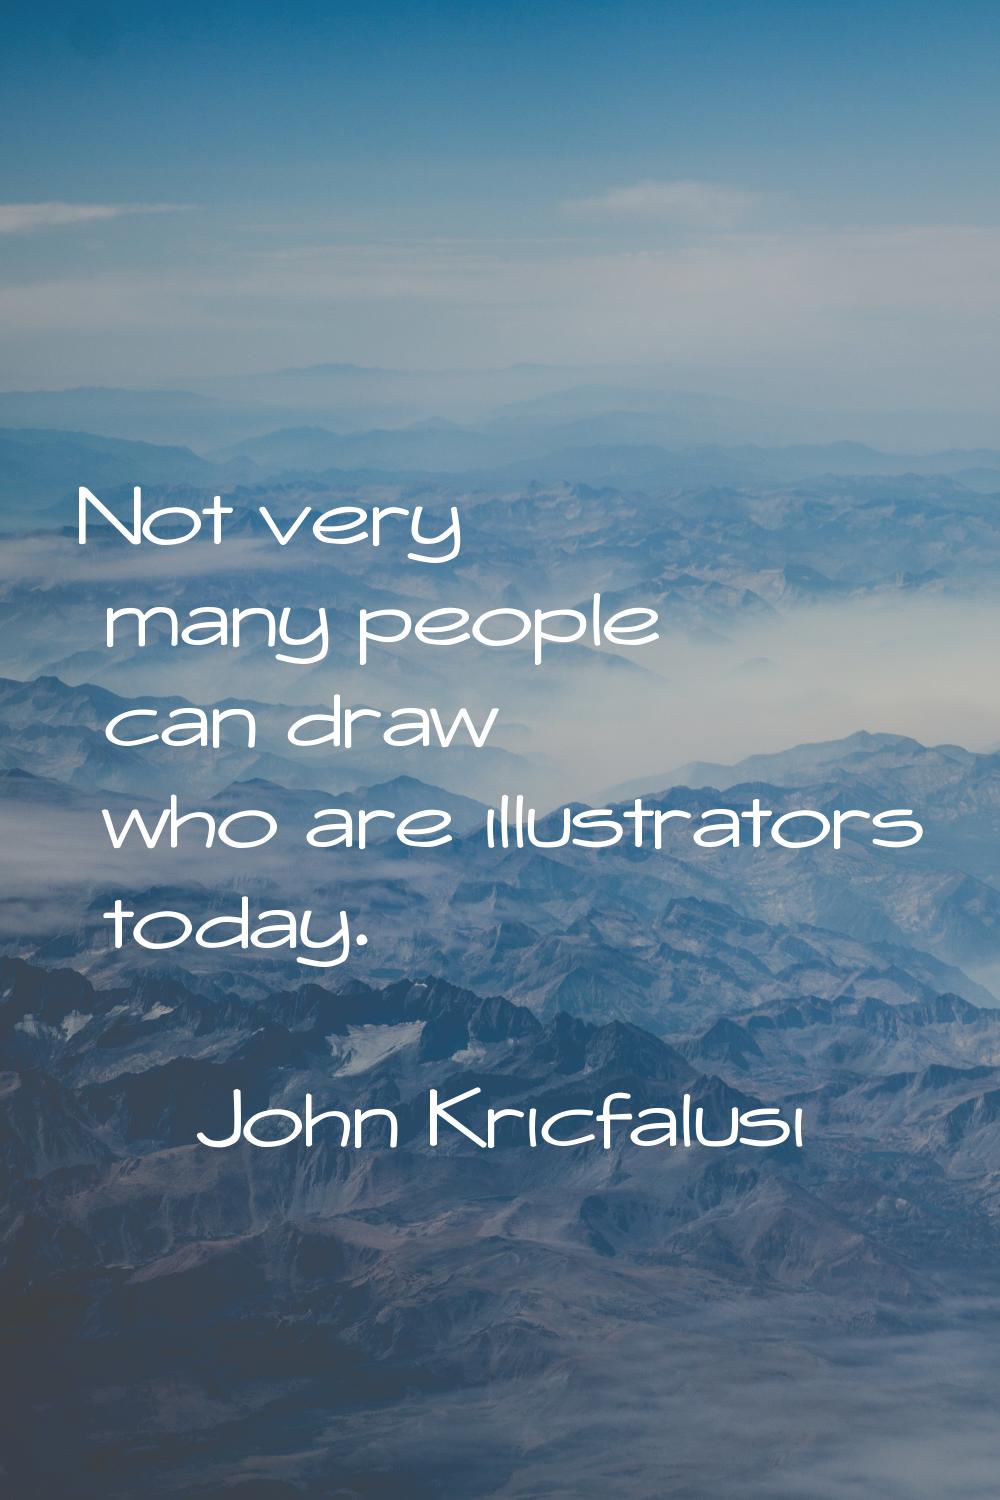 Not very many people can draw who are illustrators today.